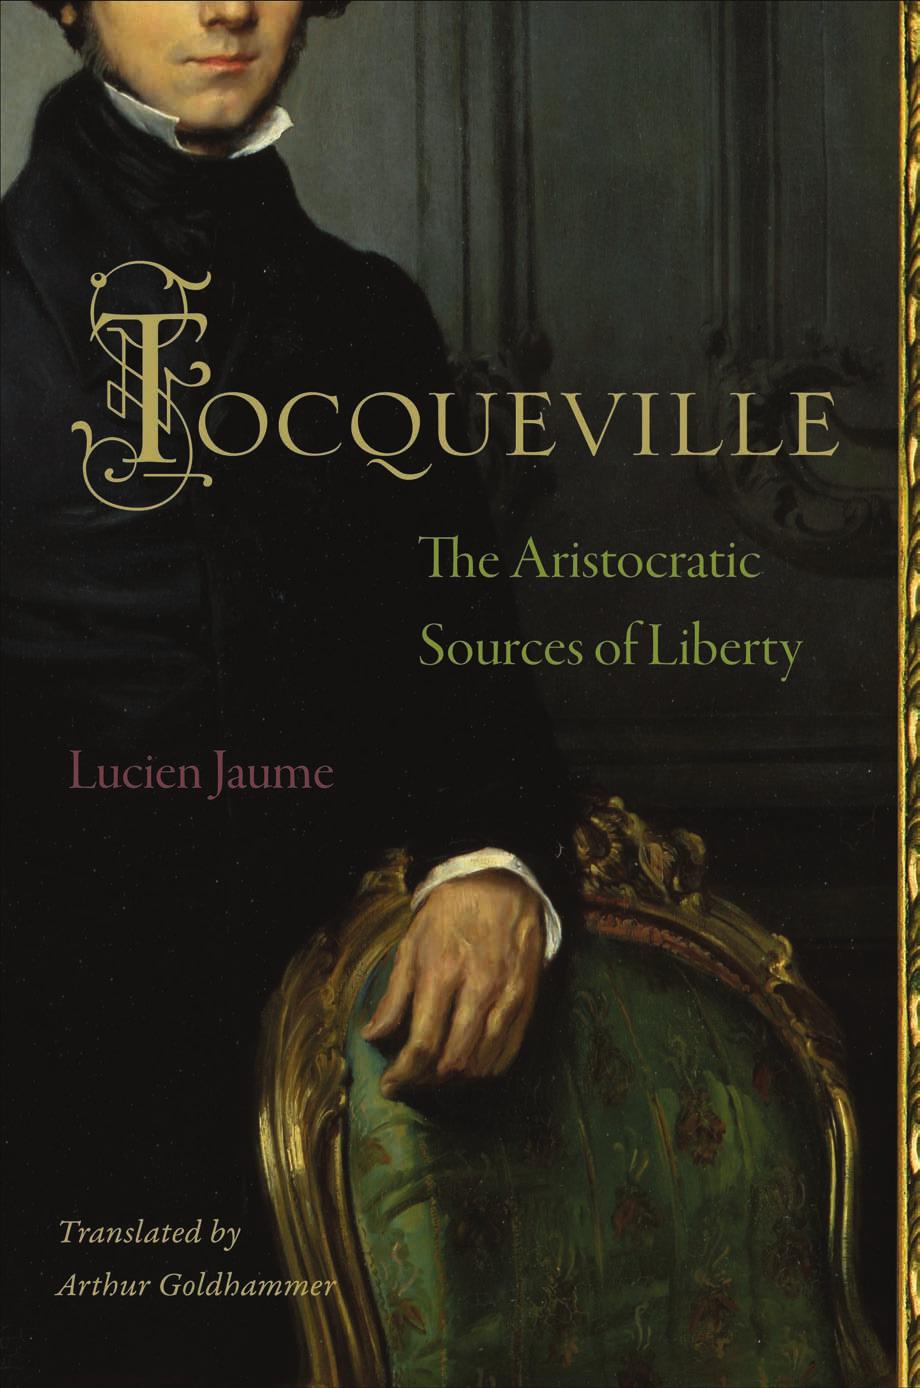 Tocqueville: The Aristocratic Sources of Liberty by Lucien Jaume